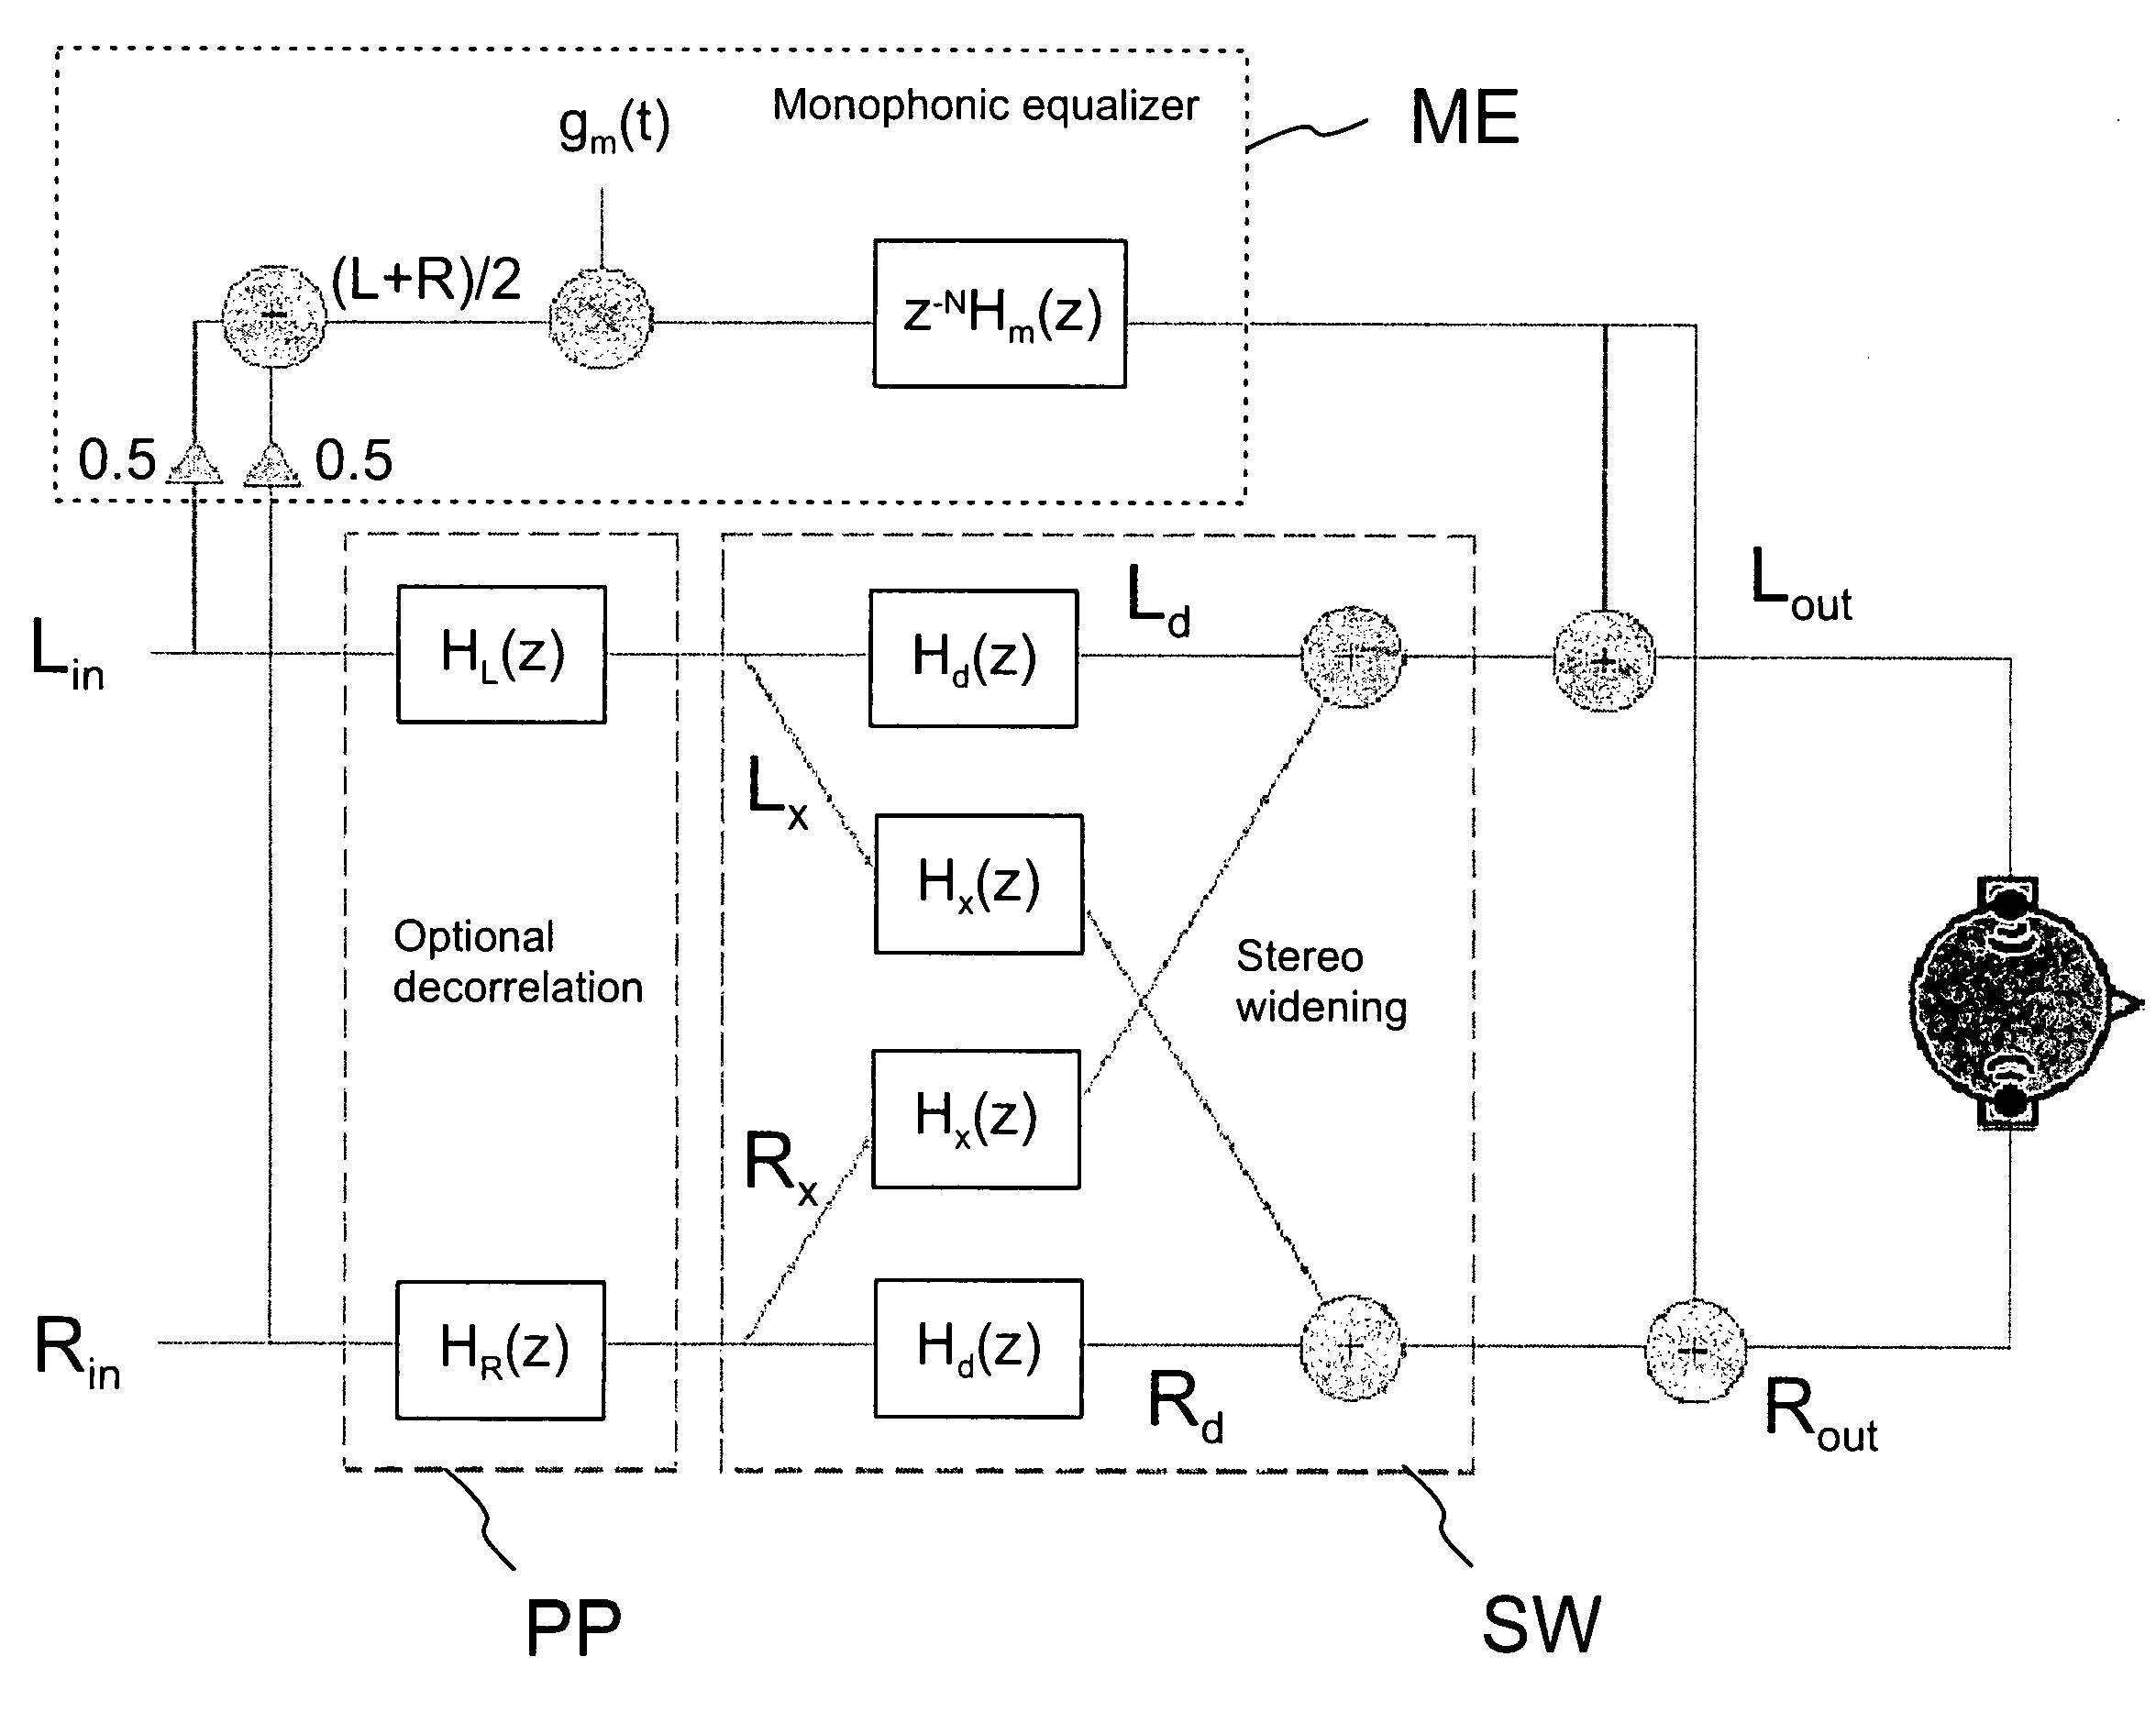 Equalization of the output in a stereo widening network